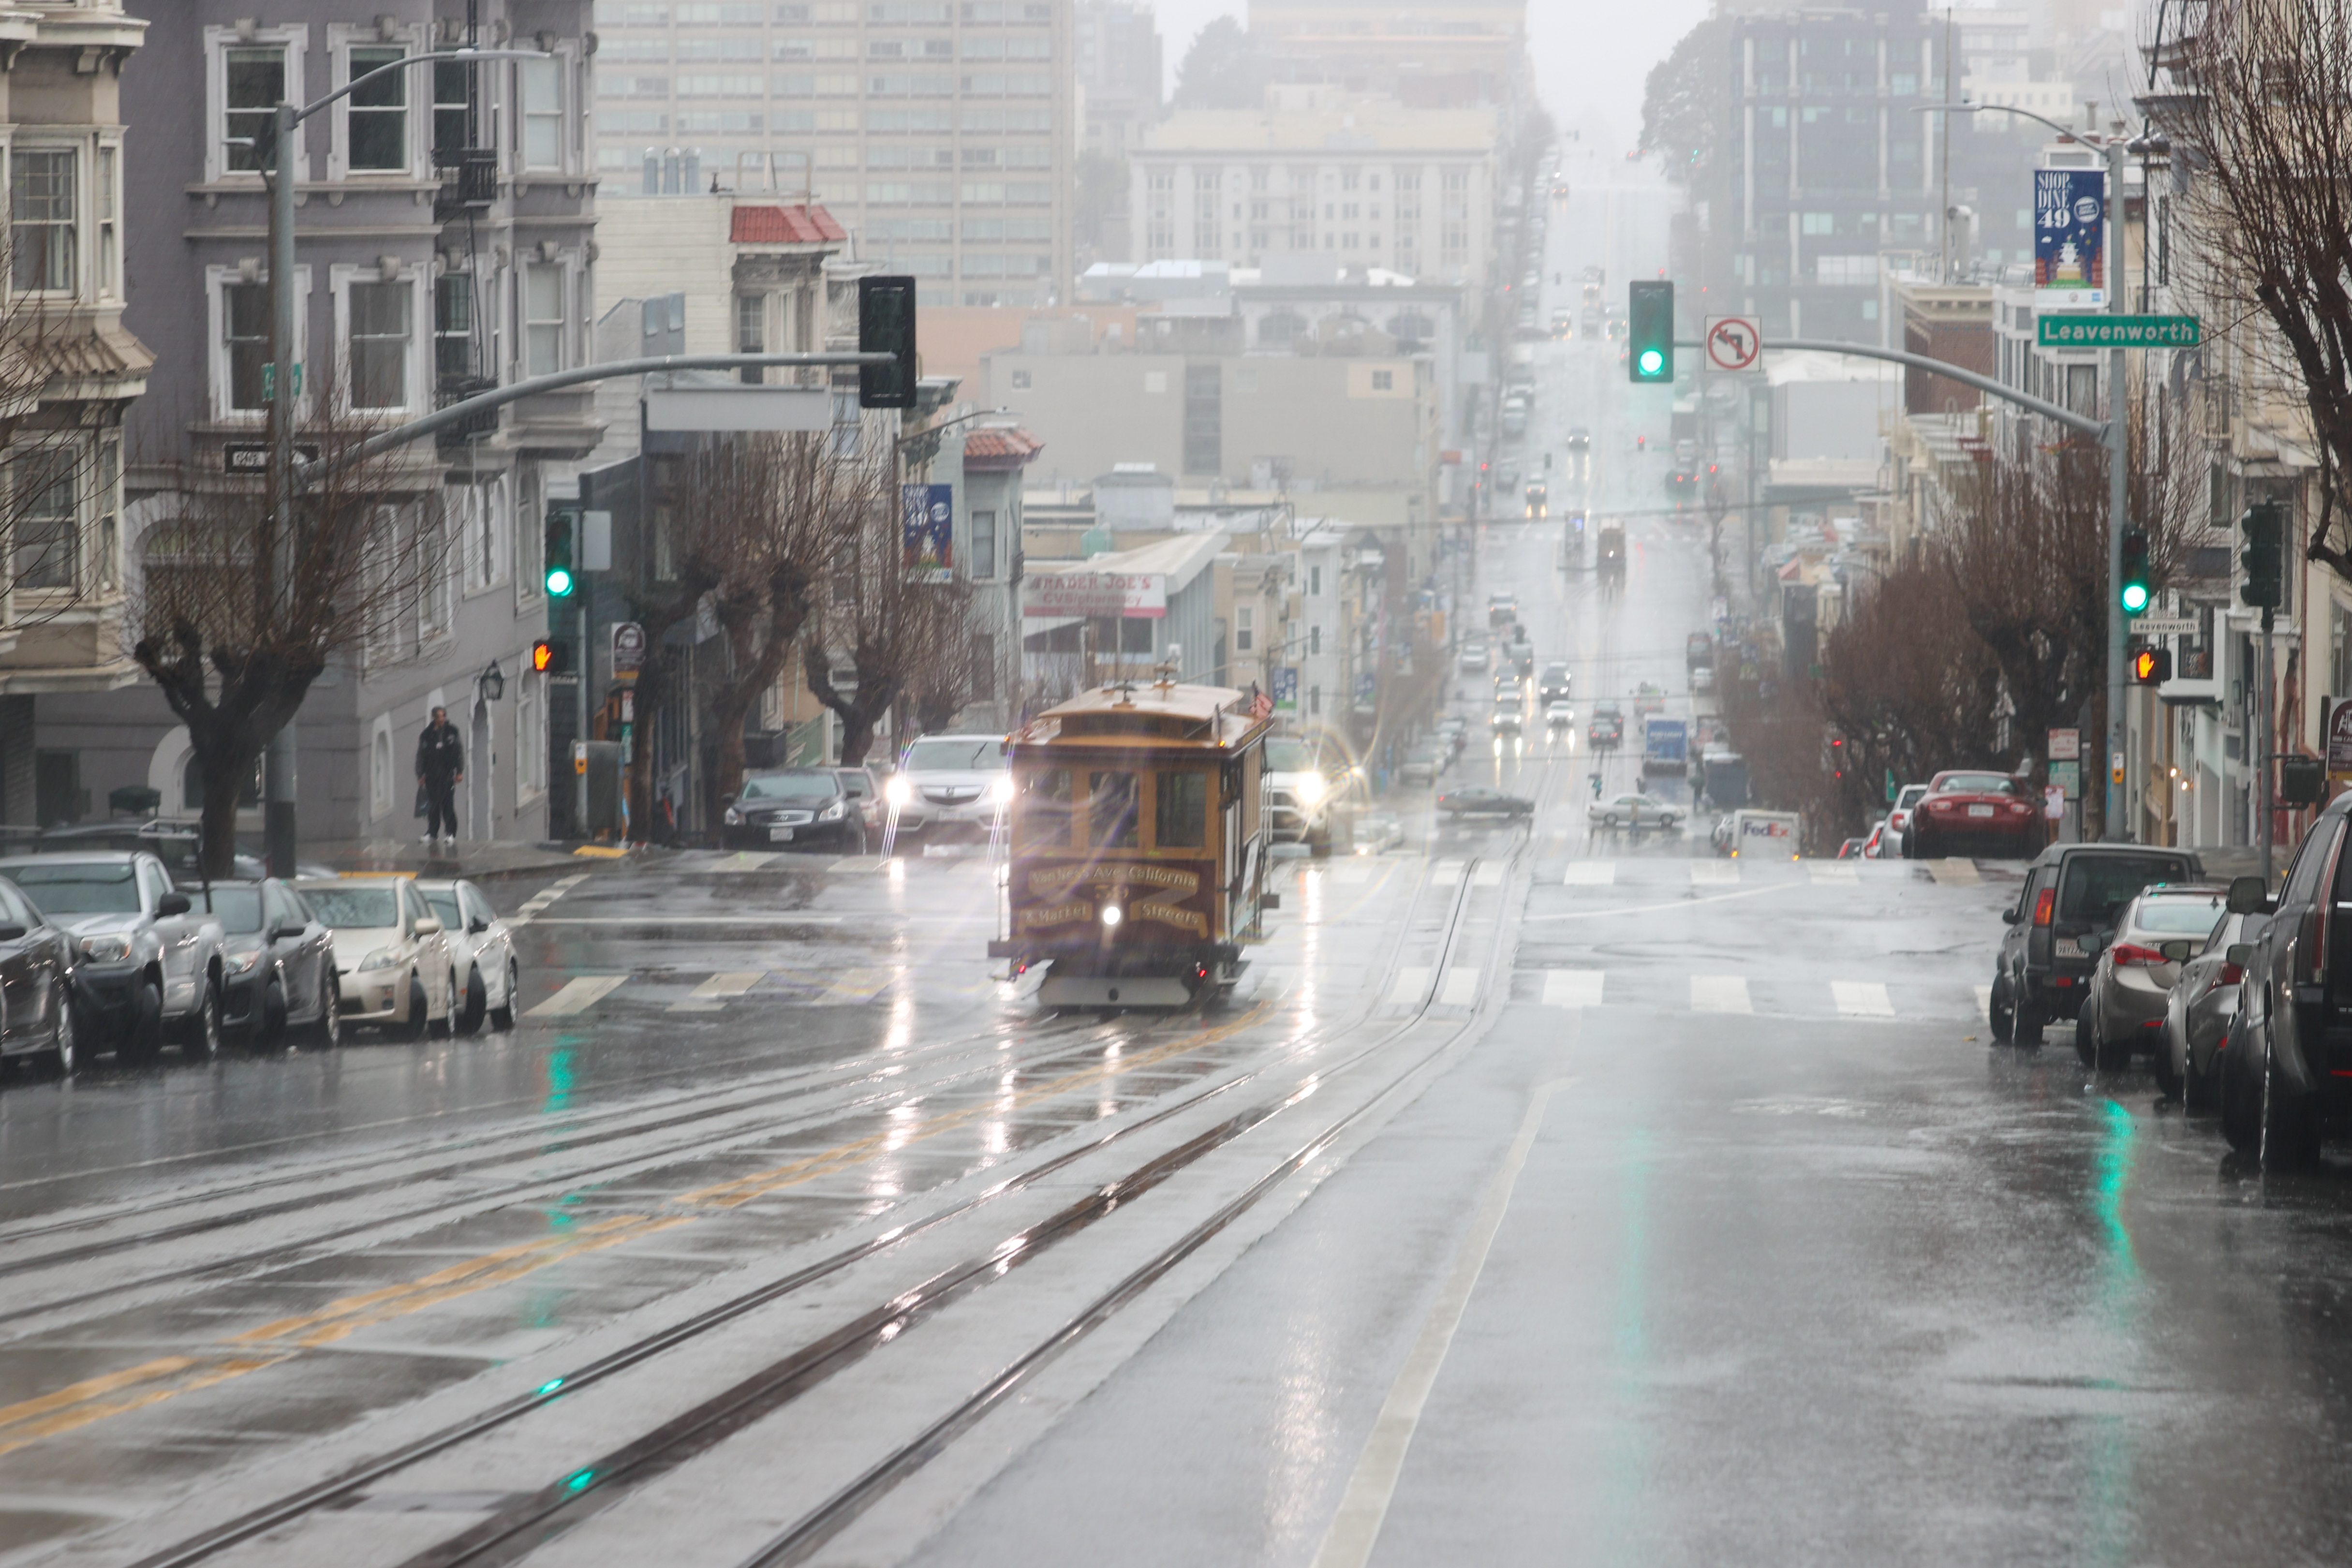 A view of a cable car on California Street in San Francisco on January 11, 2023, as atmospheric river storms hit California, United States.